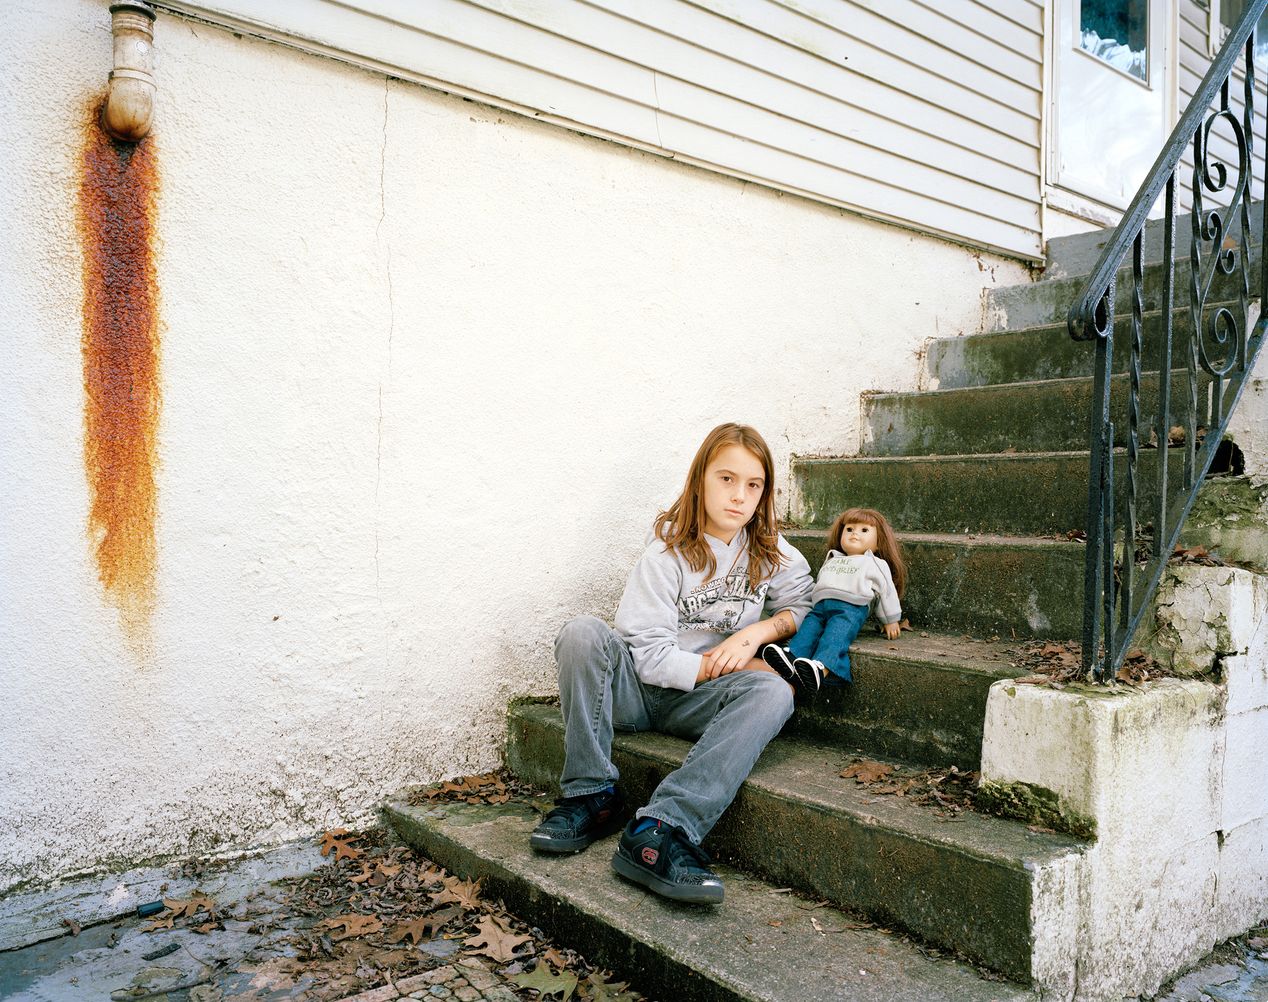 A young girl with her lookalike doll sitting on steps outside her home, environmental portrait photography, Ilona Szwarc, contemporary Los Angeles artist.